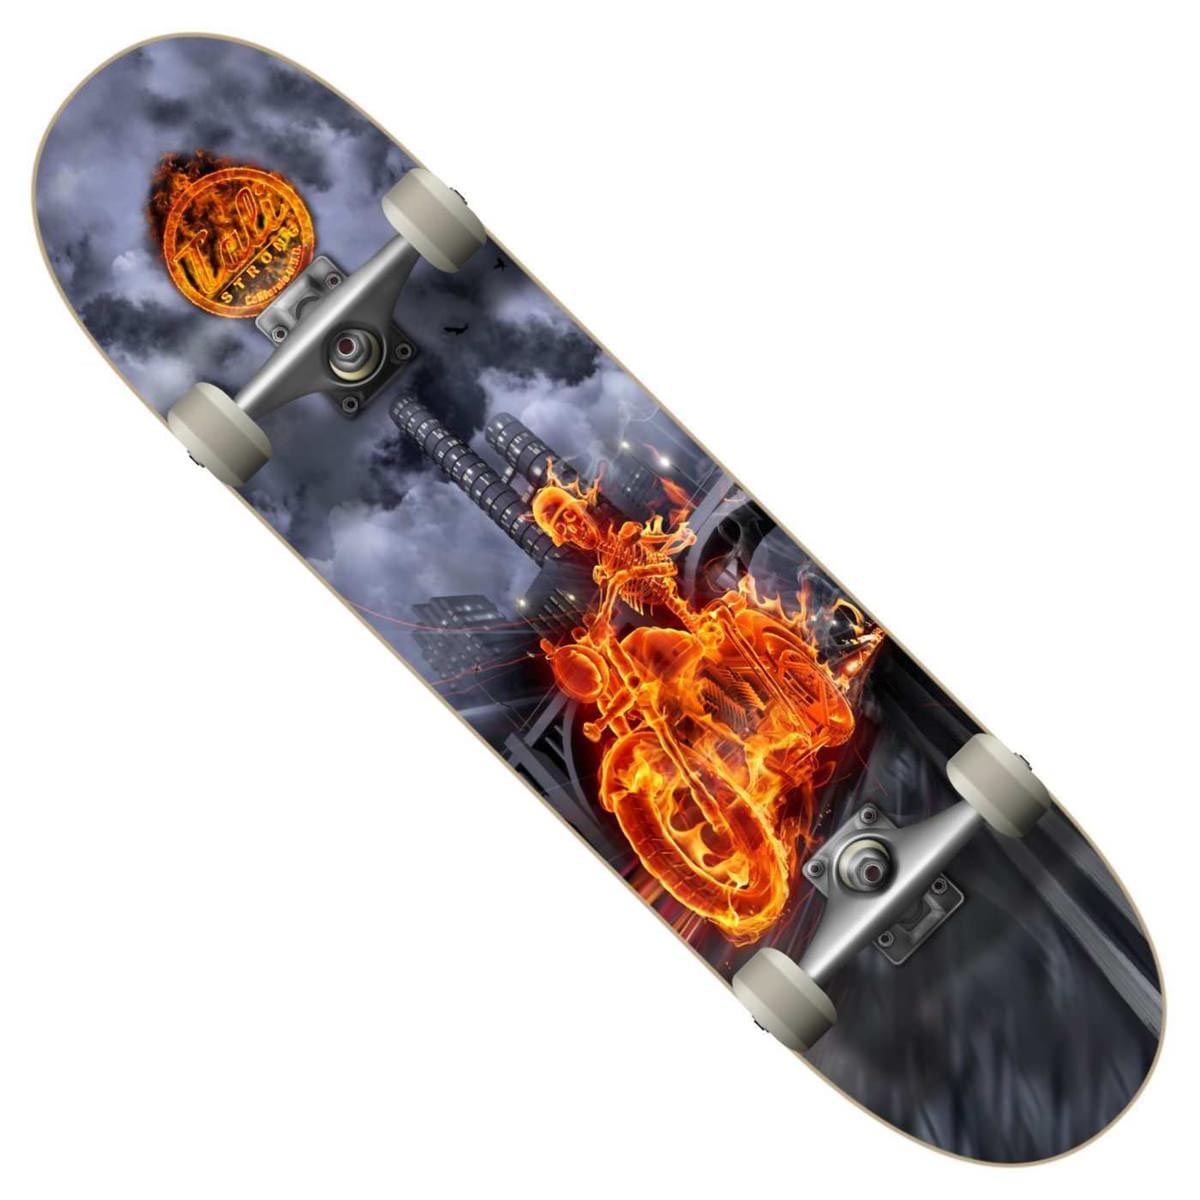 CALI Strong Flame Rider Skateboard Trick Complete - Trick Skateboard - Image 1 - CALI Strong